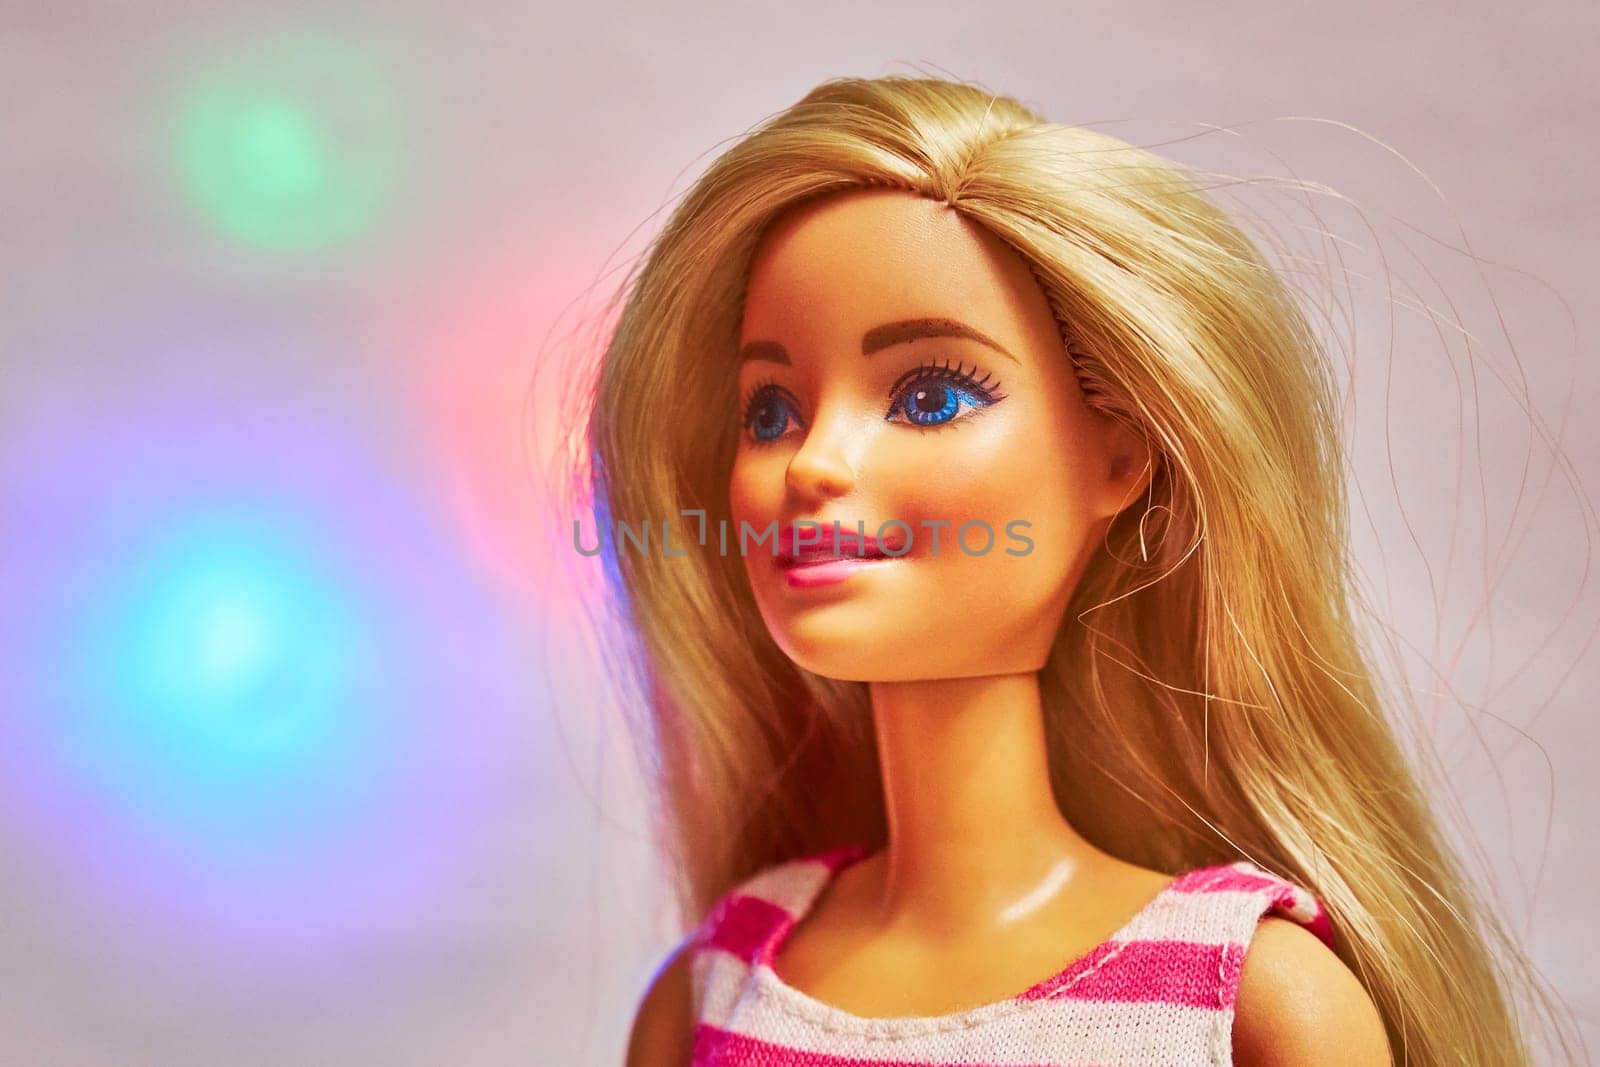 Ryazan, Russia - February 10, 2023: Barbie doll head close-up. The most popular doll in the world